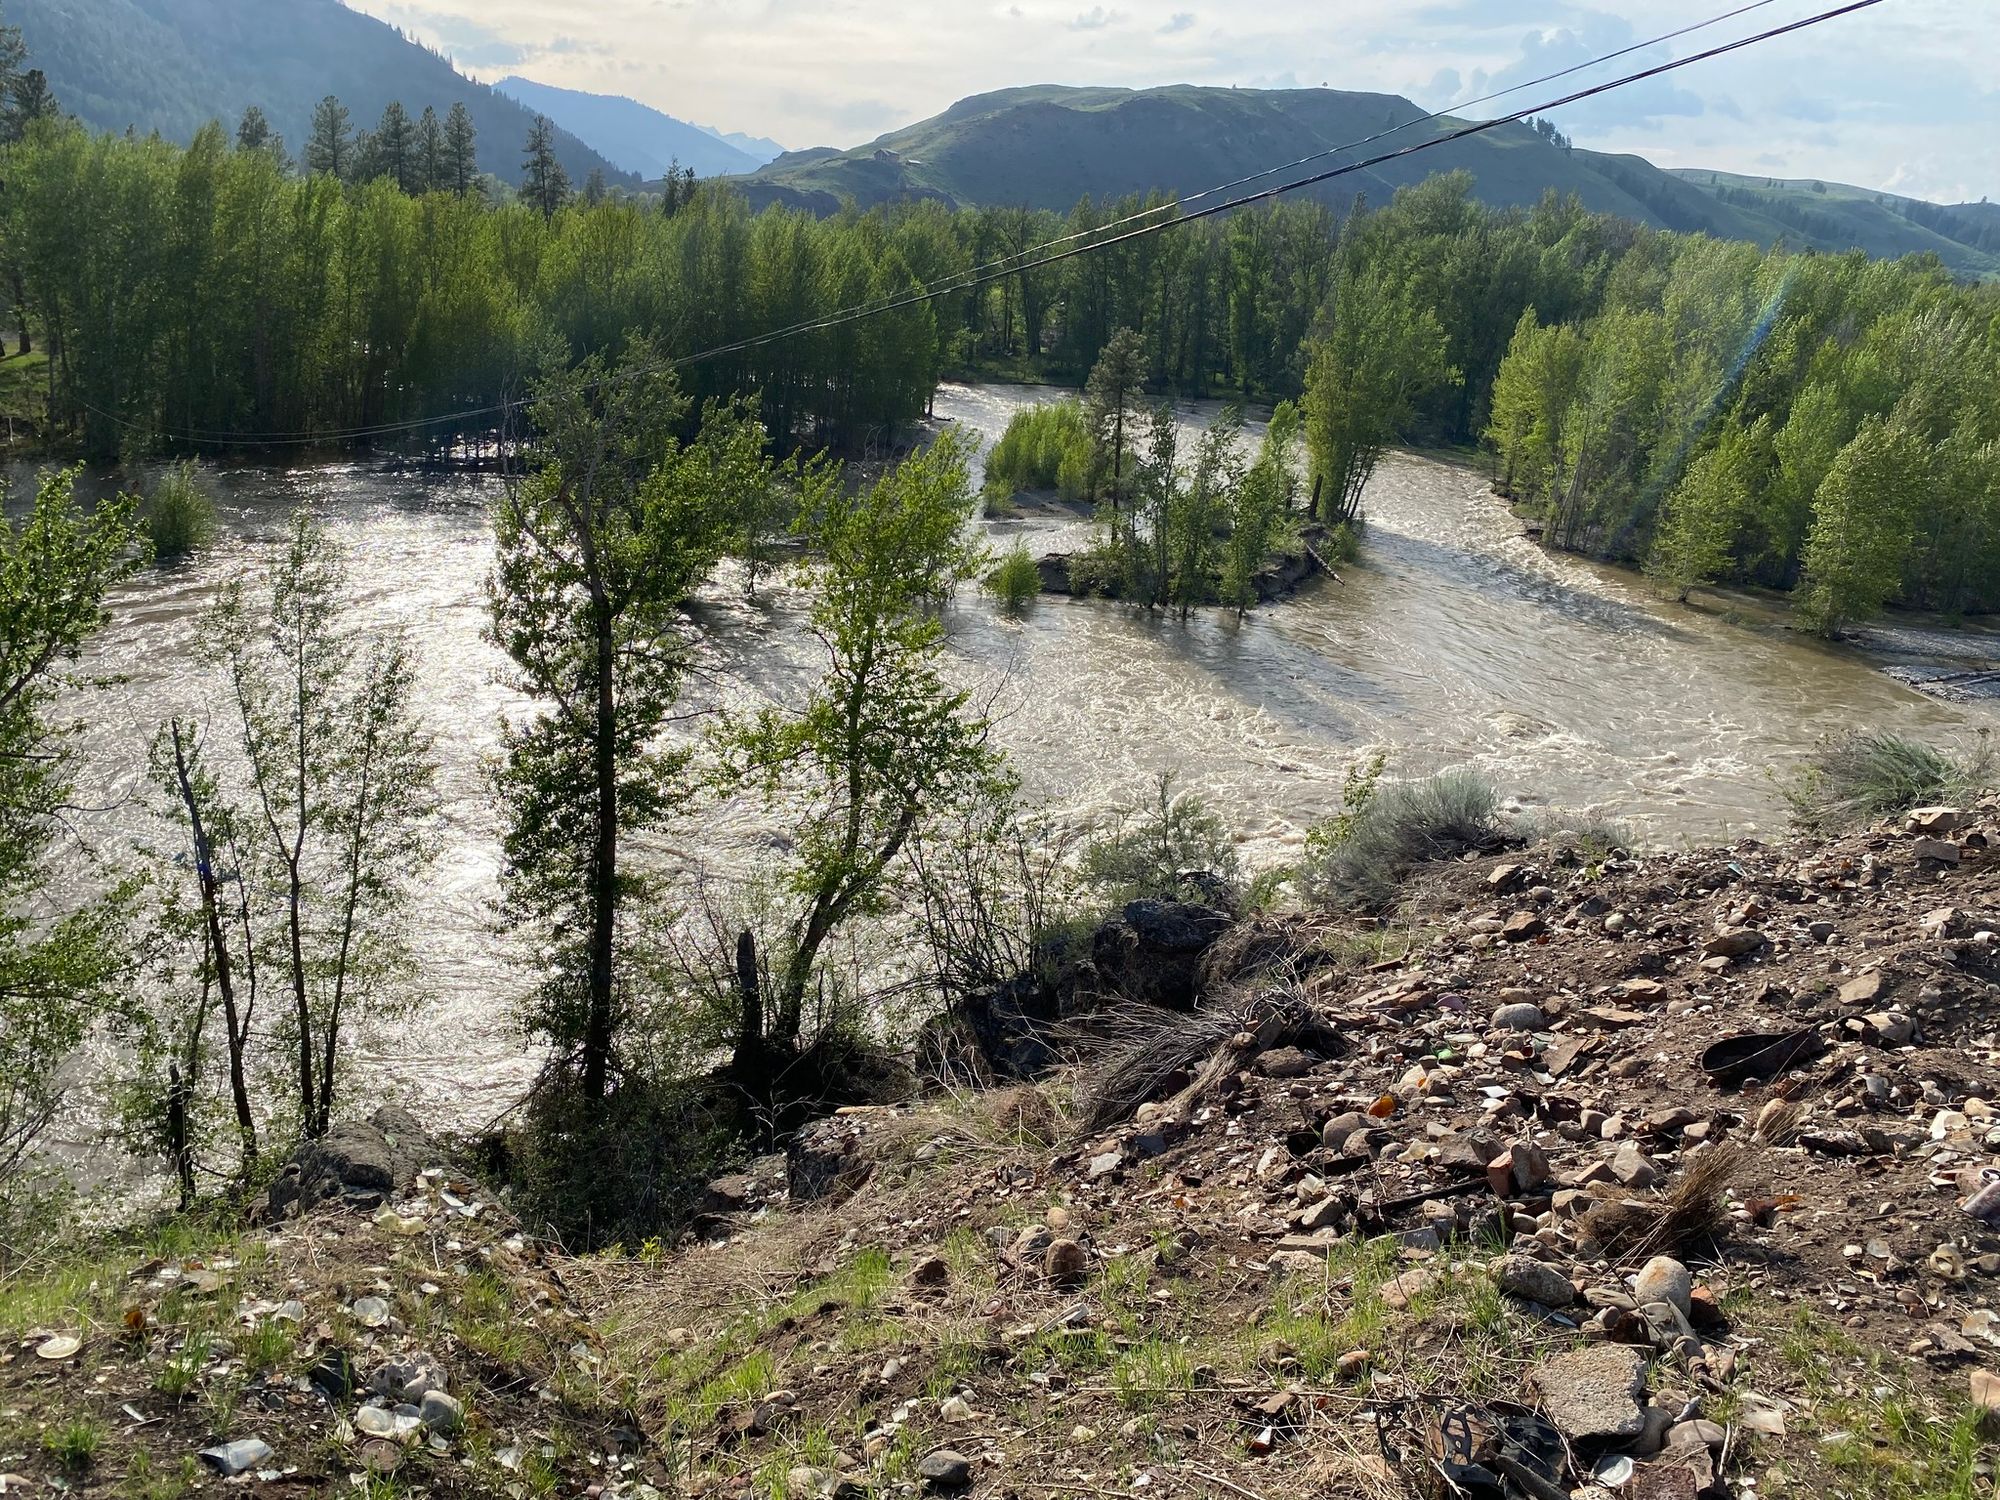 confluence of Twisp River and Methow River